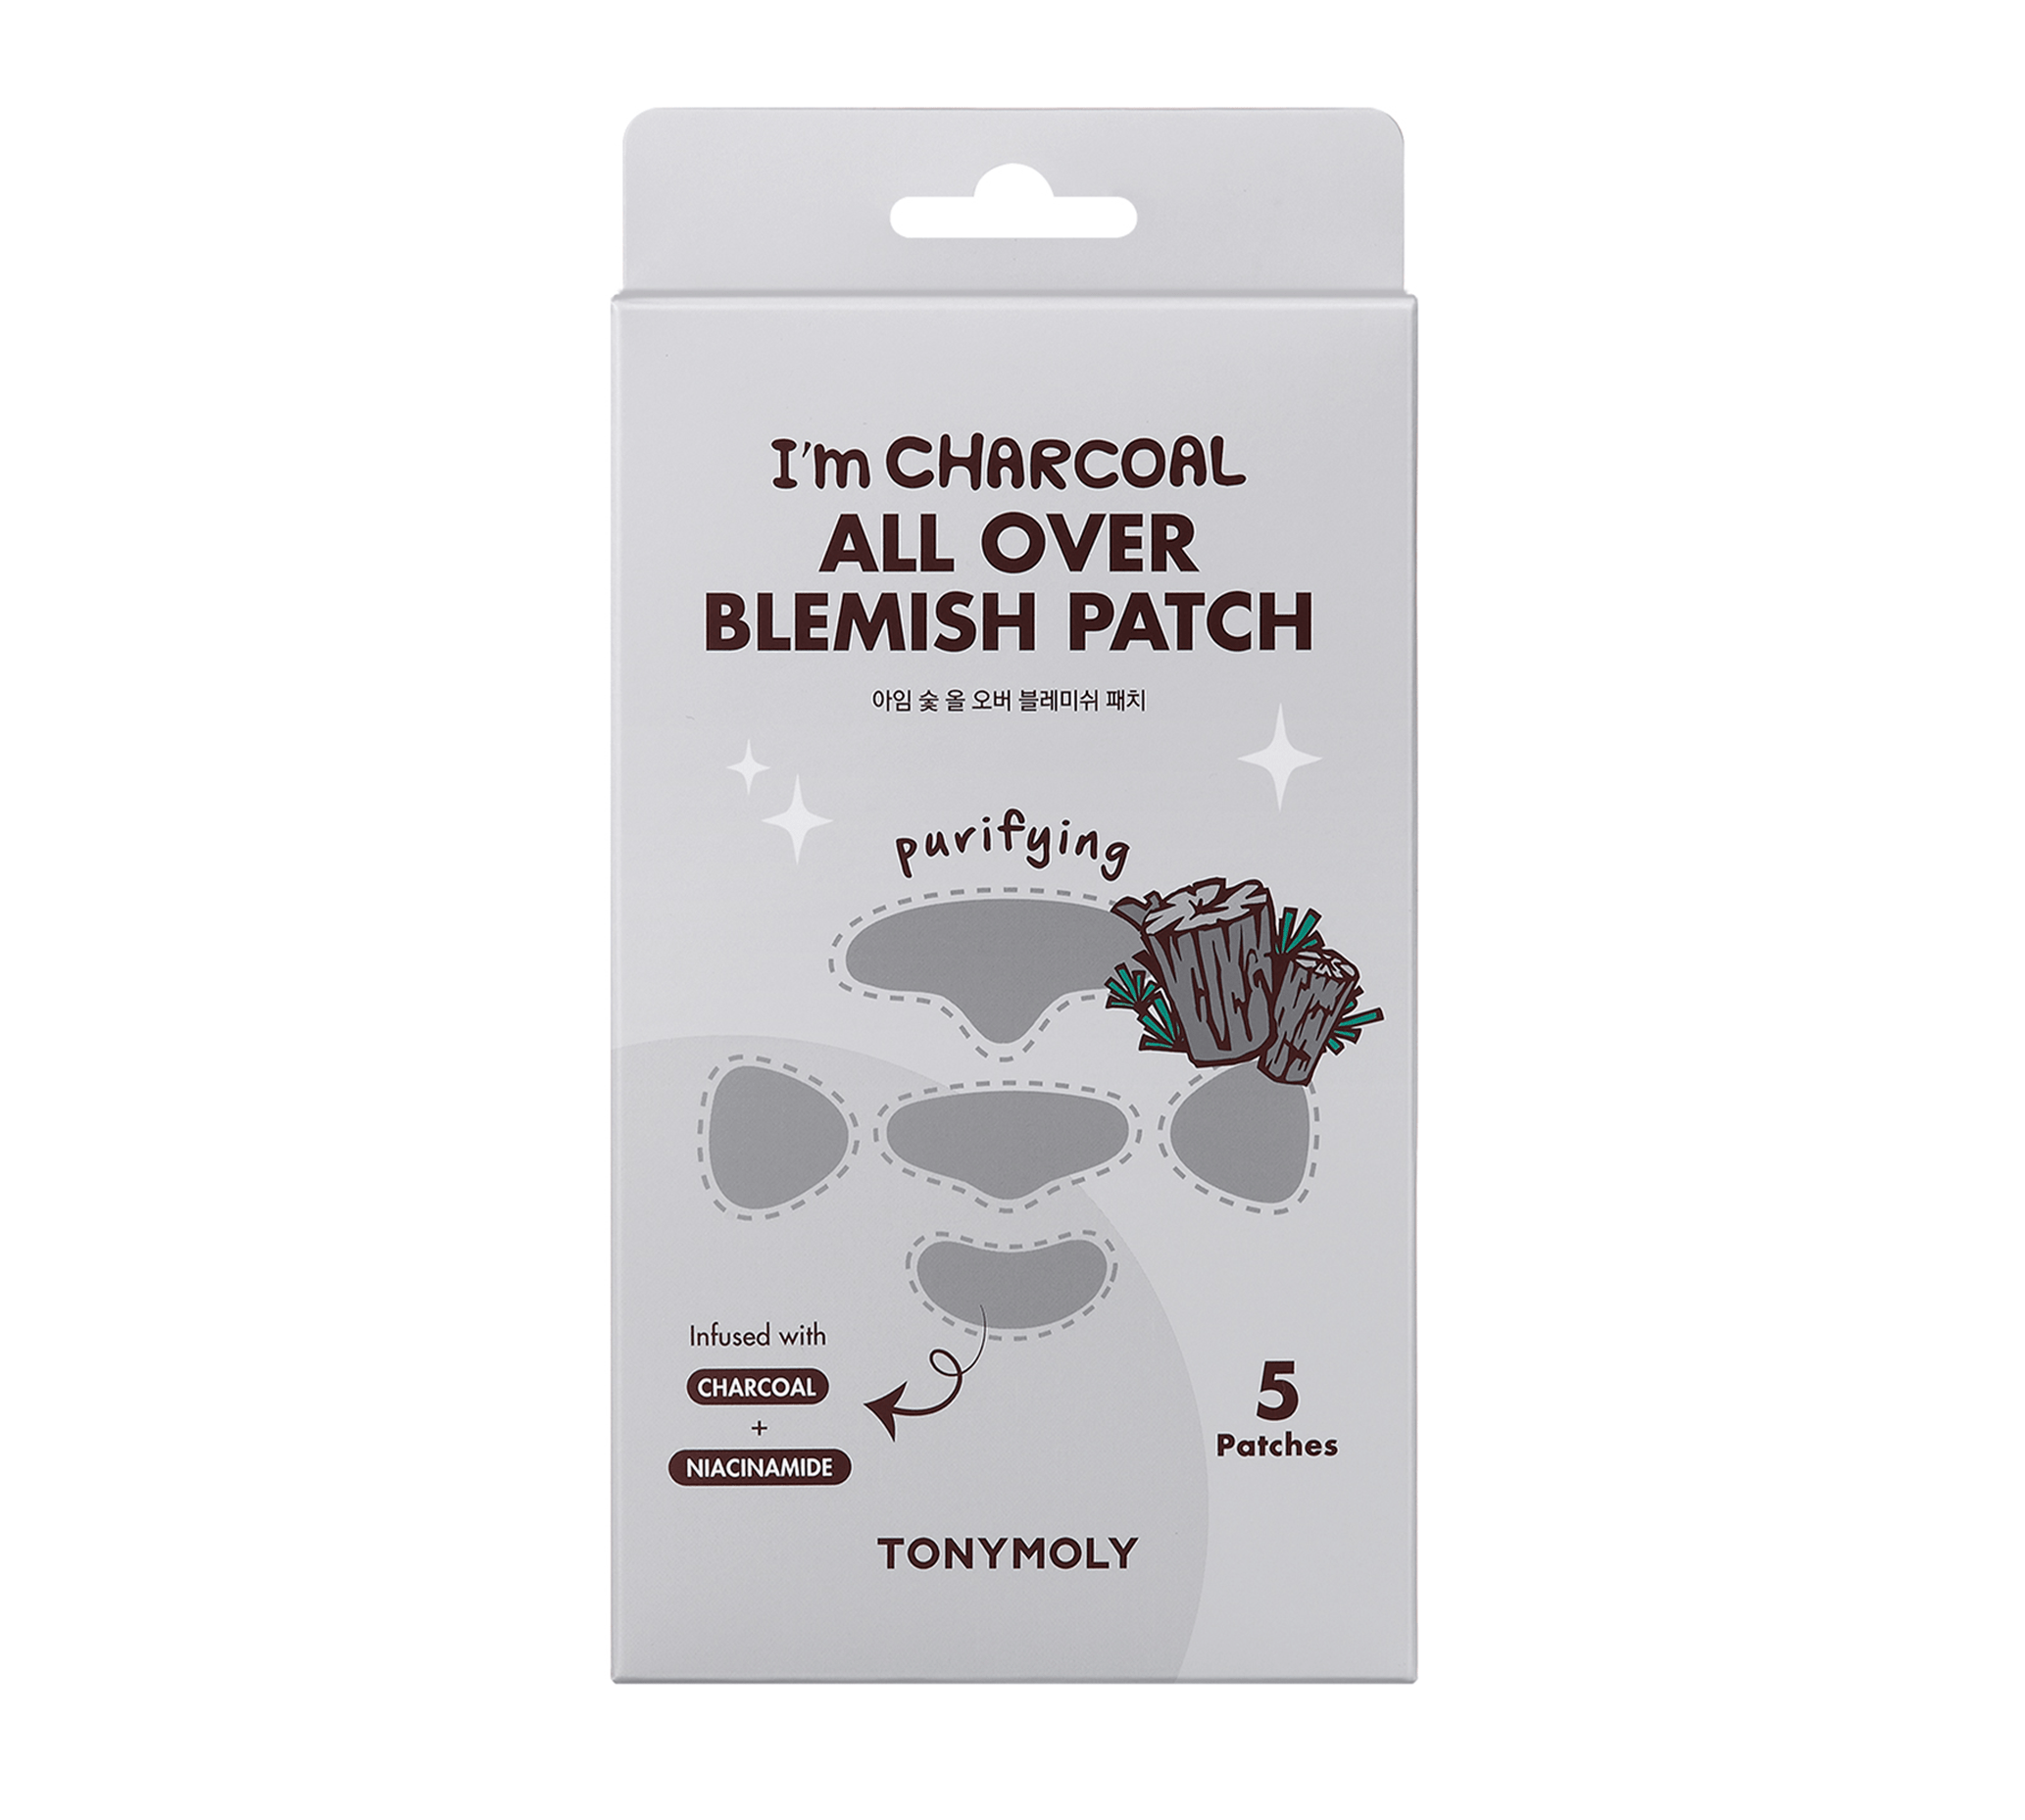 TONYMOLY I'm Charcoal All Over Blemish Patches Kawaii Gifts